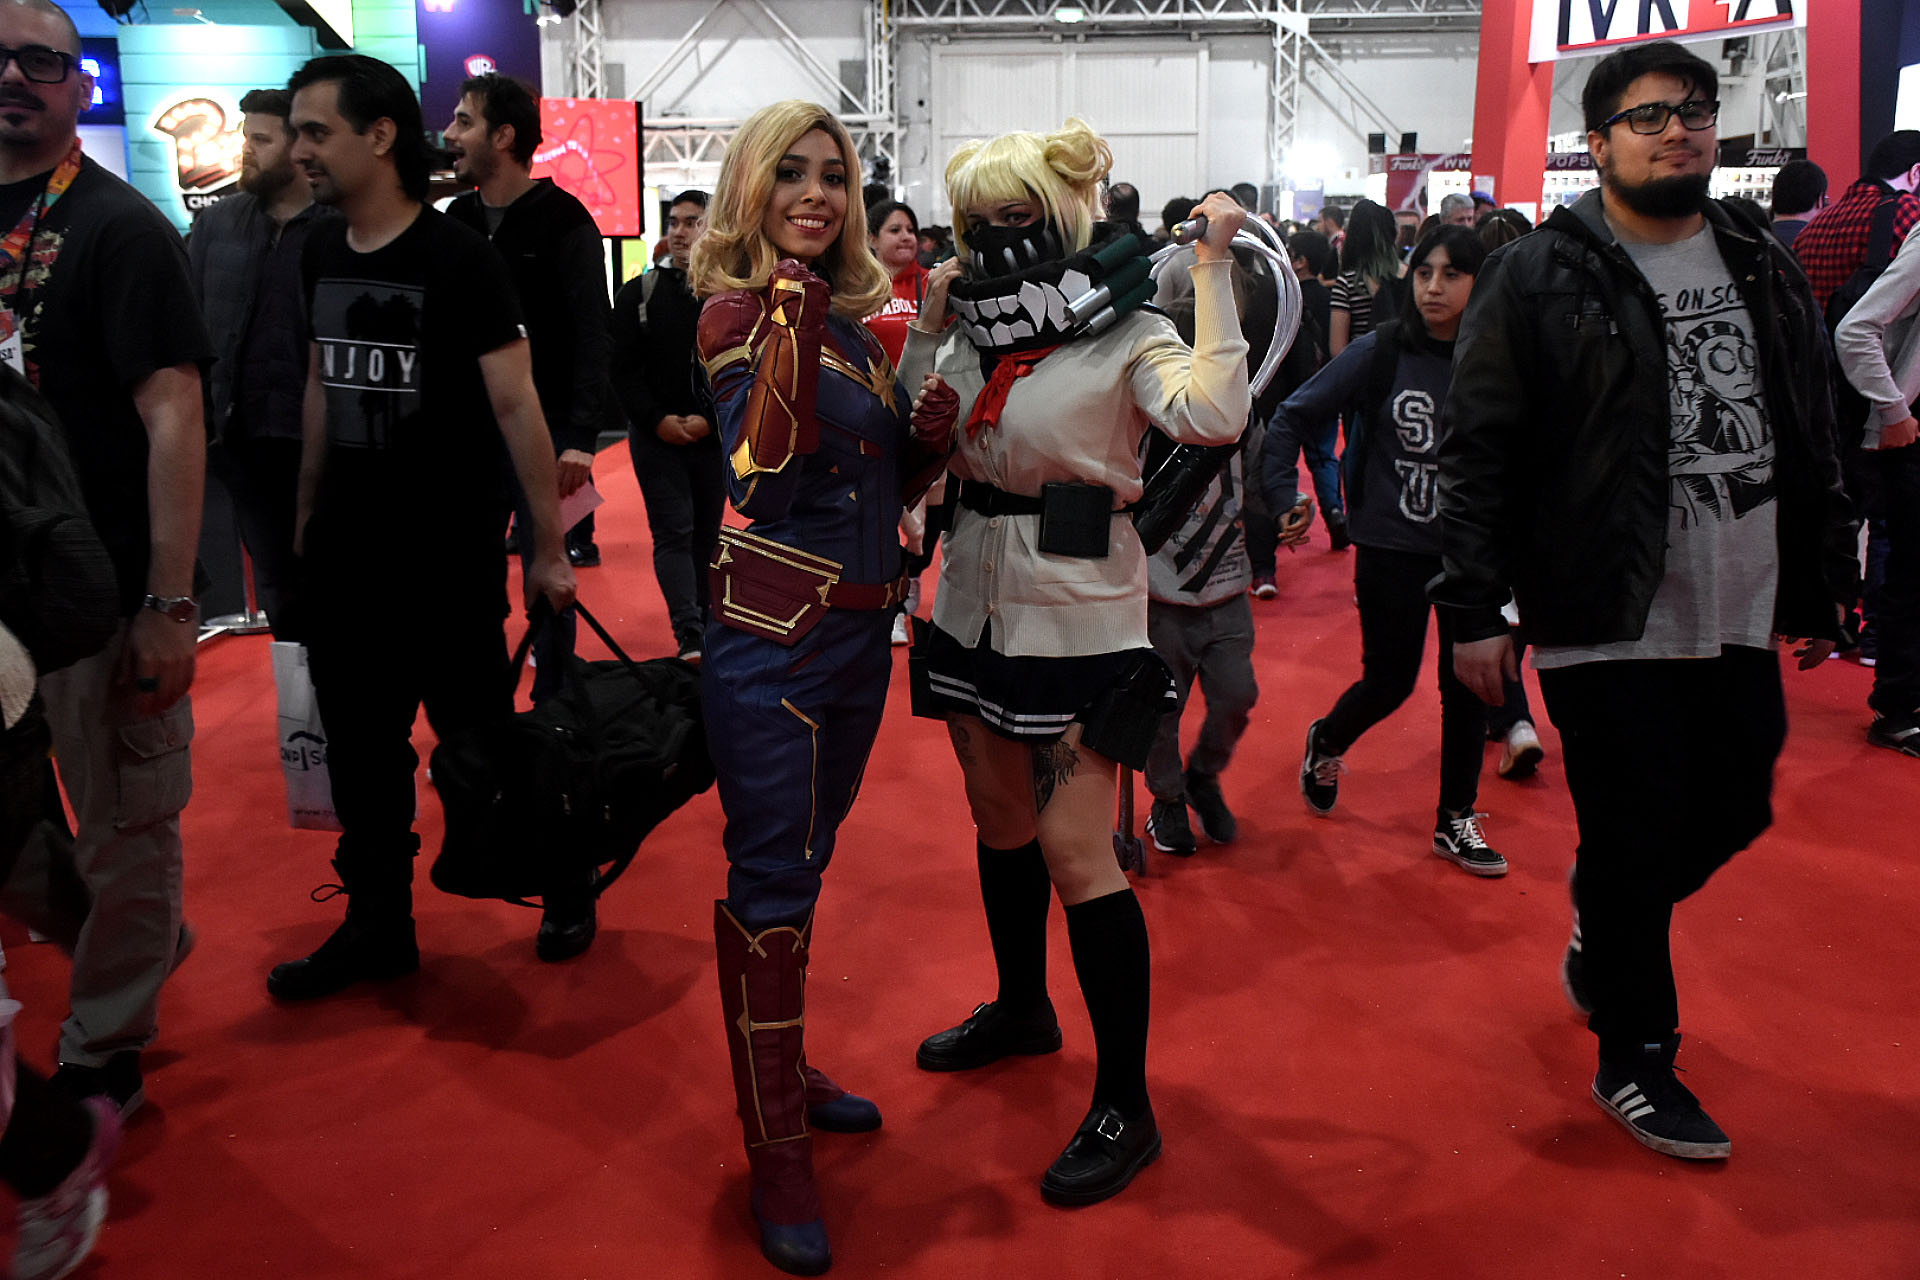 Cosplayers will take to the halls, always ready for the "selfie"(Nicholas Stulberg)